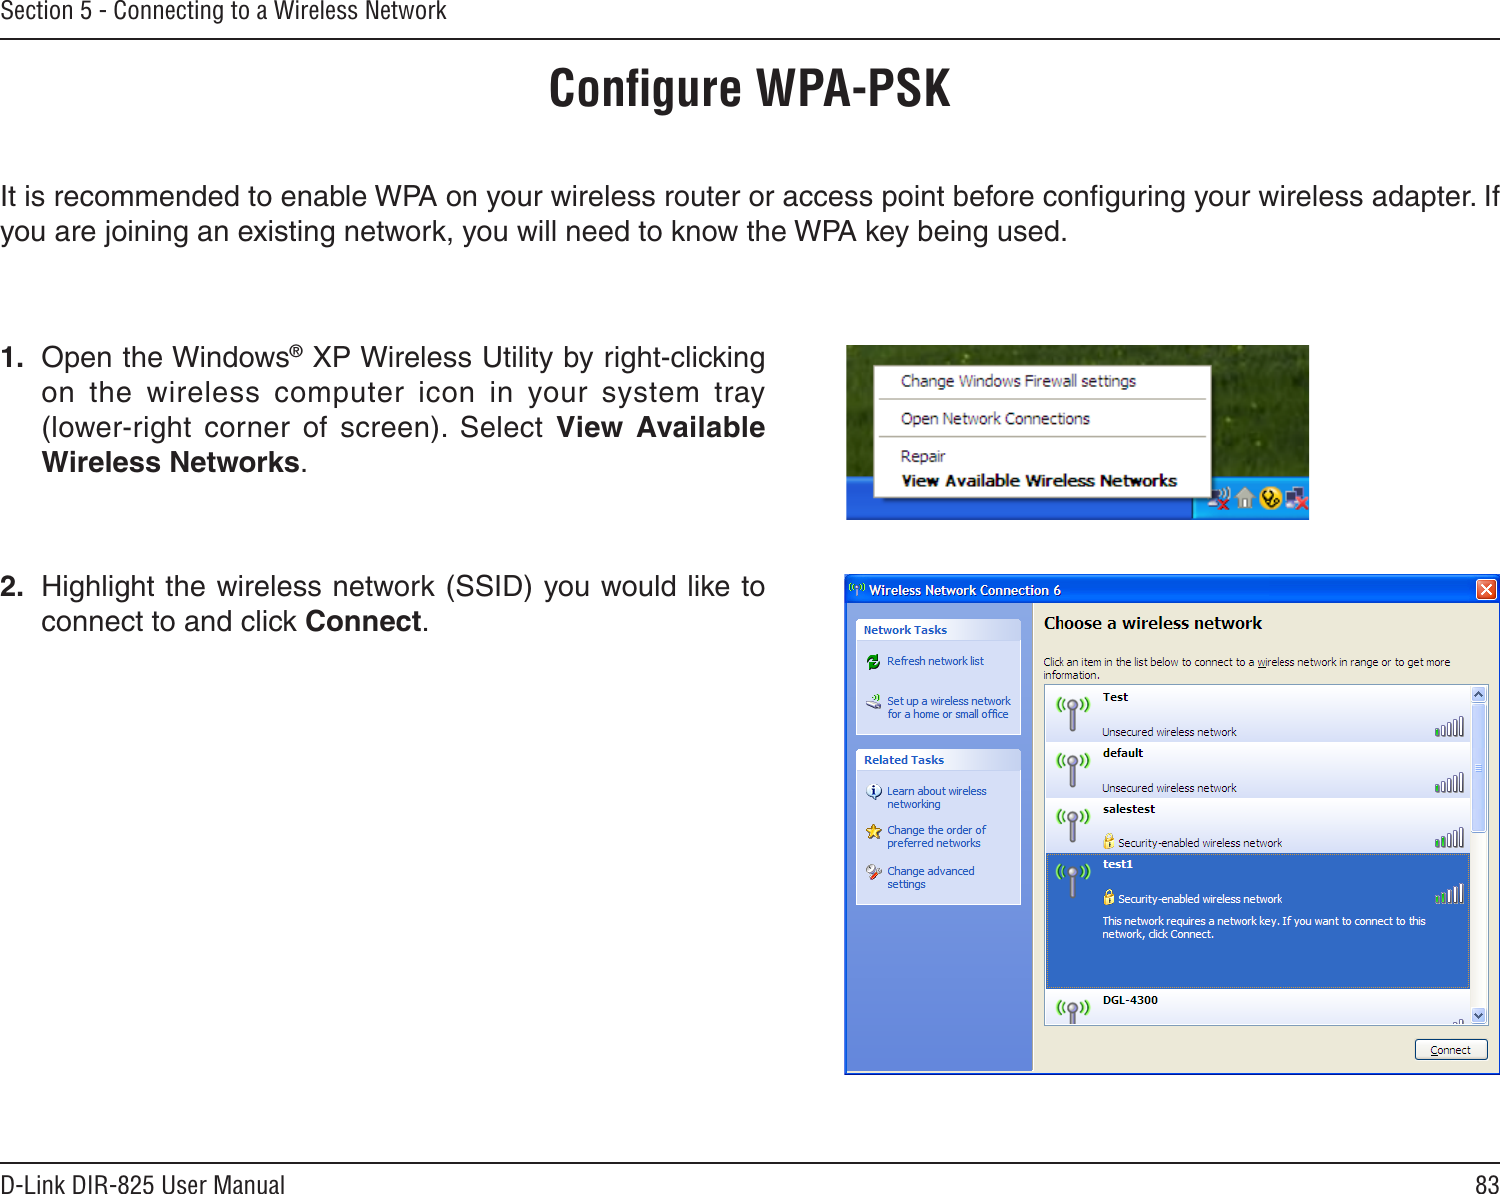 83D-Link DIR-825 User ManualSection 5 - Connecting to a Wireless NetworkConﬁgure WPA-PSKIt is recommended to enable WPA on your wireless router or access point before conﬁguring your wireless adapter. If you are joining an existing network, you will need to know the WPA key being used.2.  Highlight the wireless network (SSID) you would like to connect to and click Connect.1.  Open the Windows® XP Wireless Utility by right-clicking on  the  wireless  computer  icon  in  your  system  tray  (lower-right  corner  of  screen).  Select  View  Available Wireless Networks. 